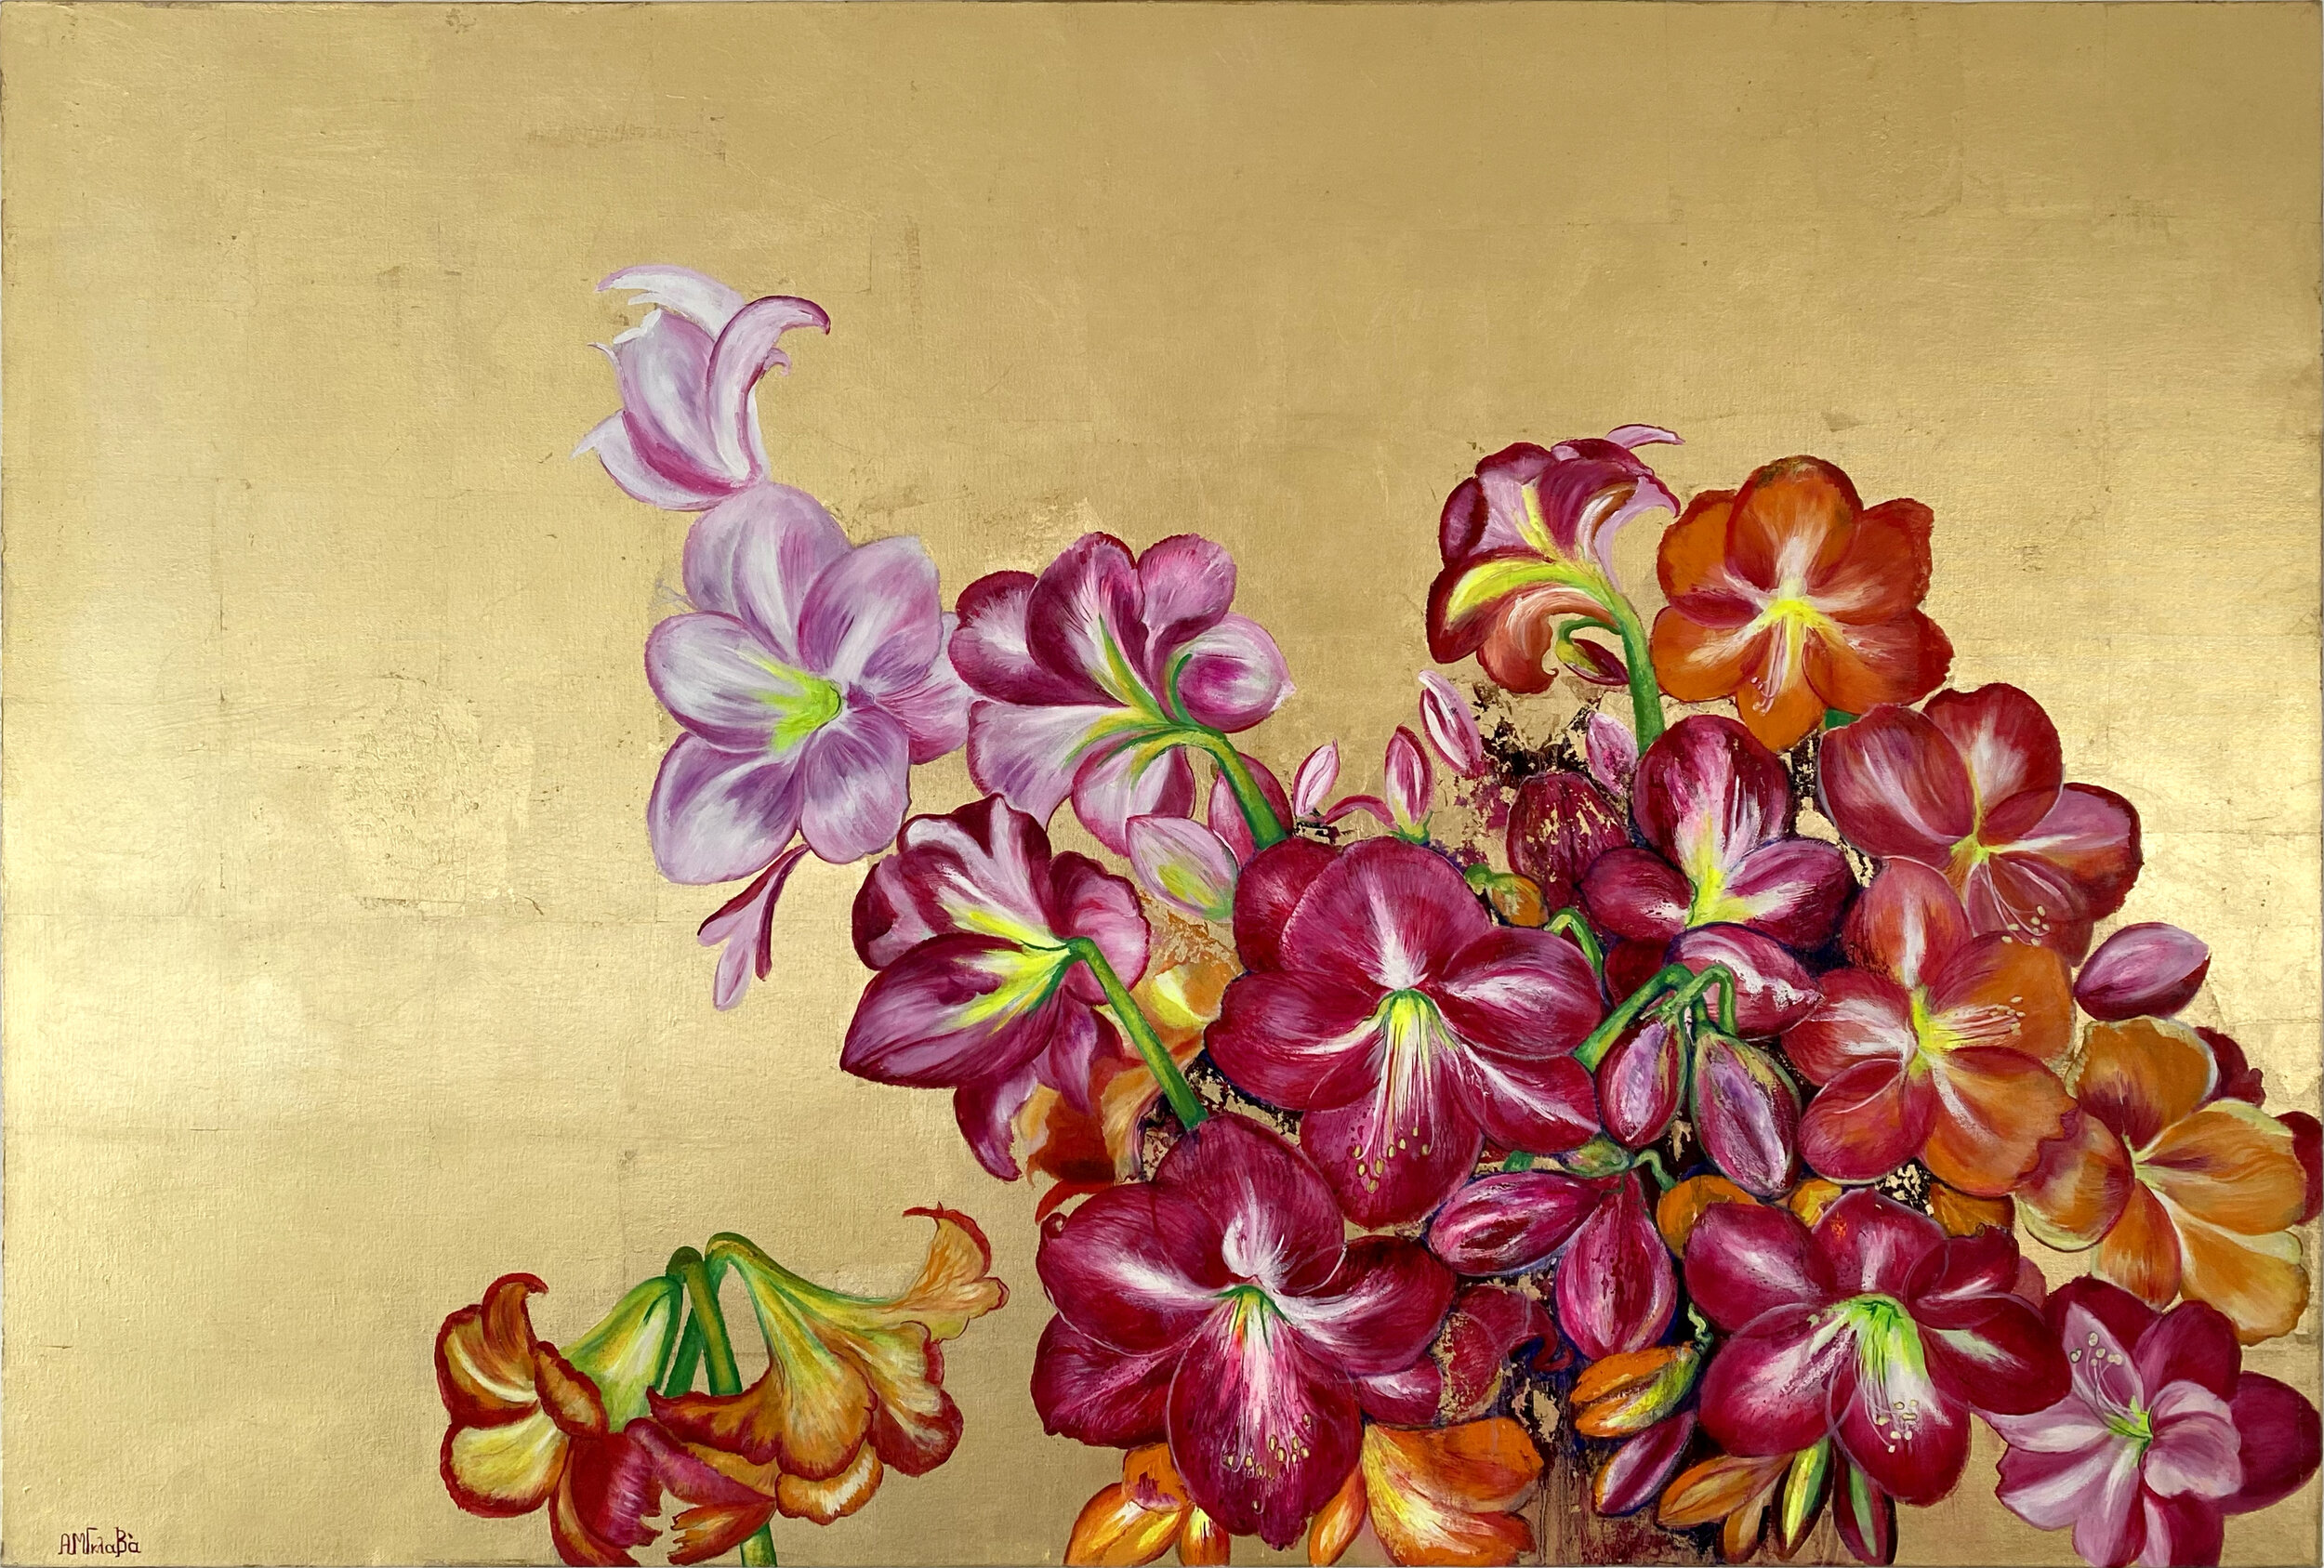  Anastasia Gklava - Lilies in the Valley - Oil and gold leaf on canvas - Dim: 39 x 59 in / 100 x 150 cm 